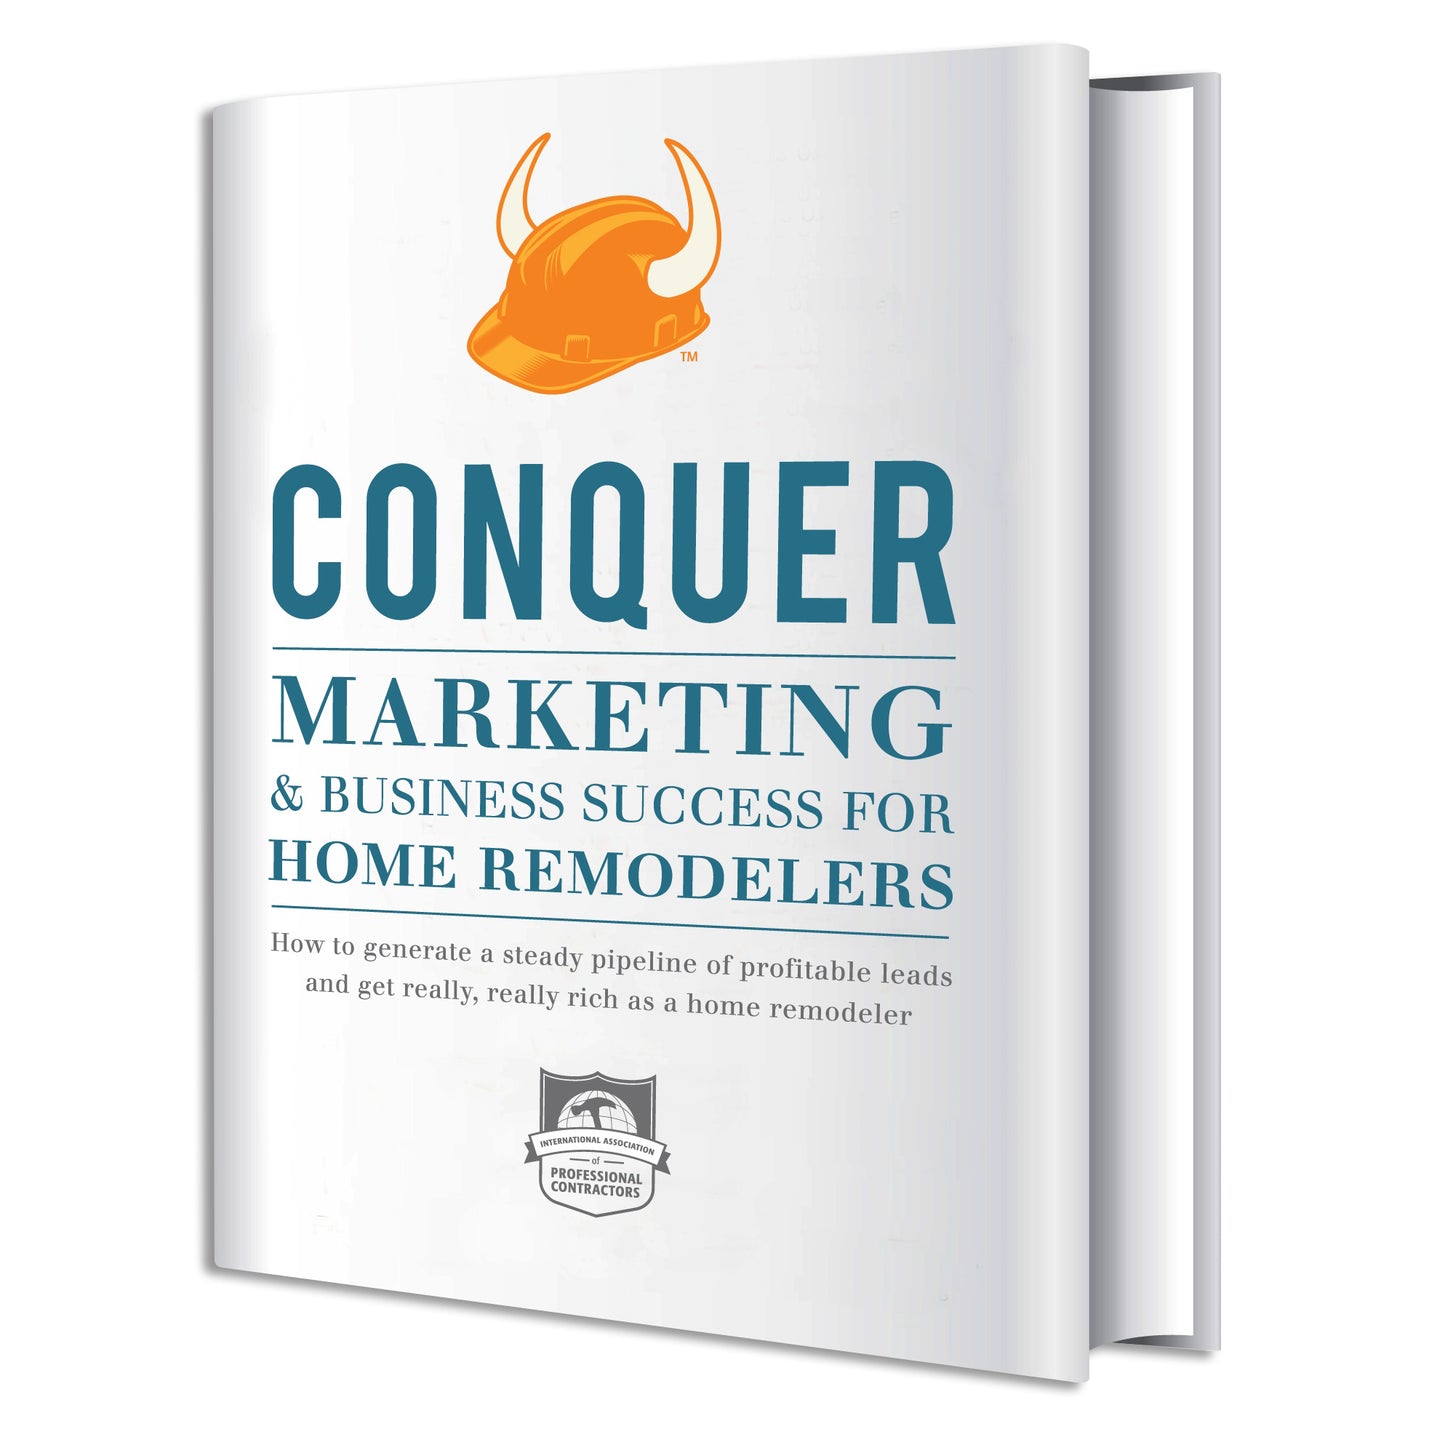 CONQUER Marketing and Business Success for Home Remodelers PDF